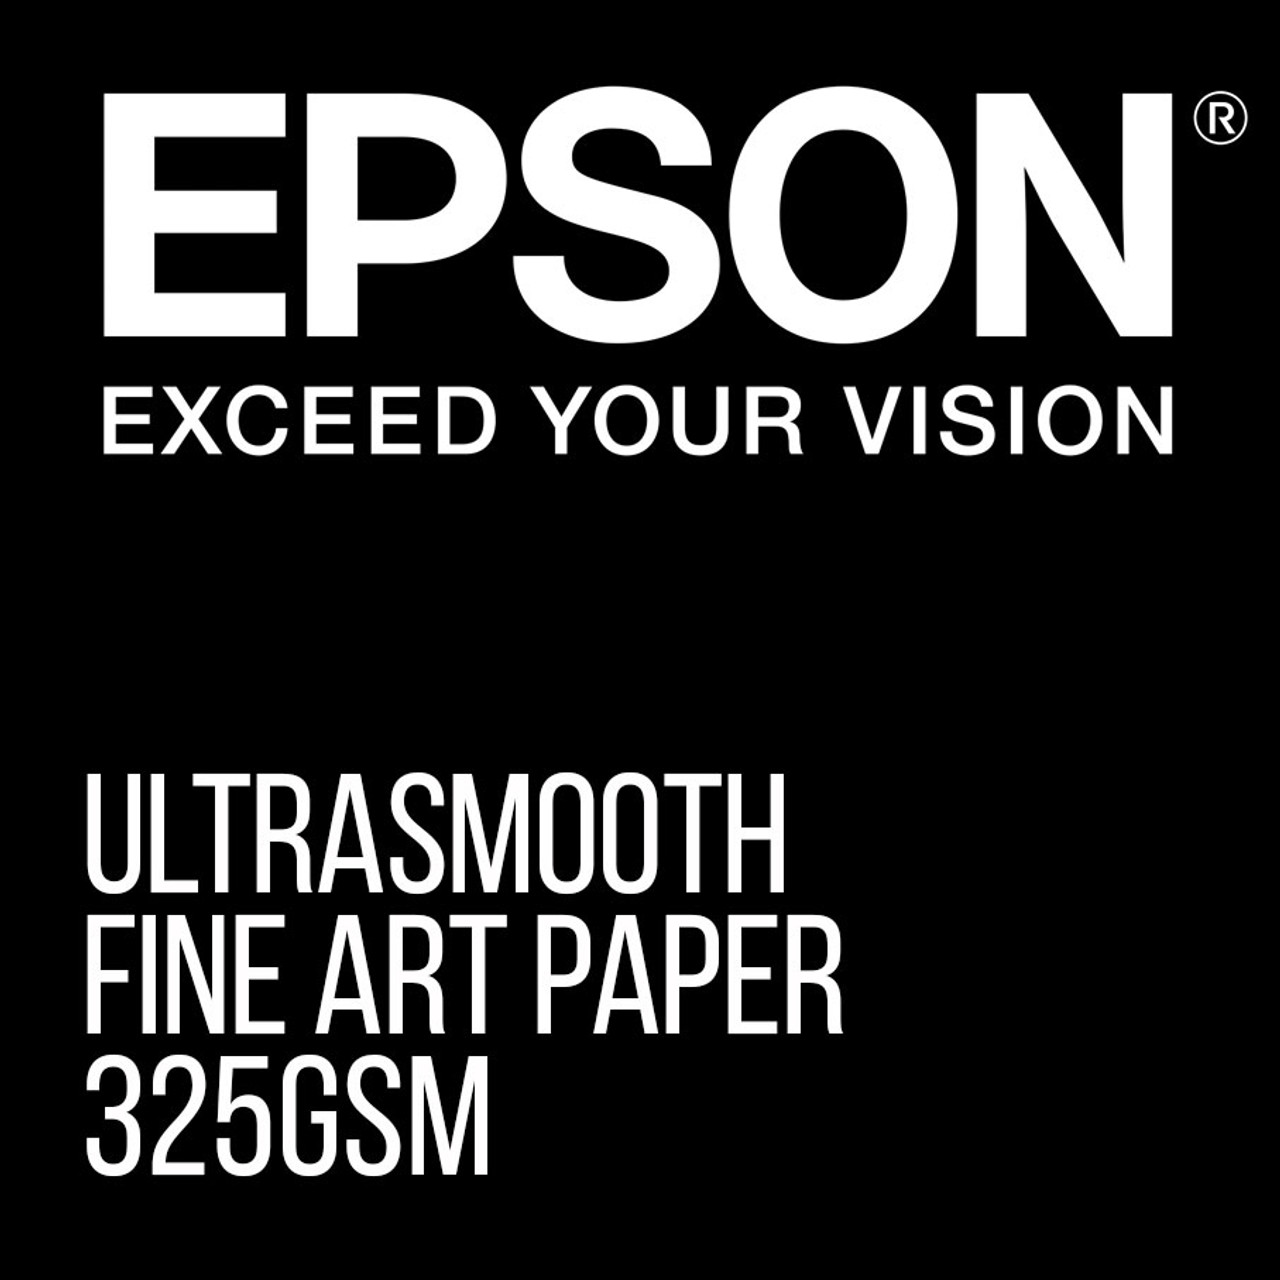 Epson ultra smooth fine art archival paper 250gsm A2 25 sheets